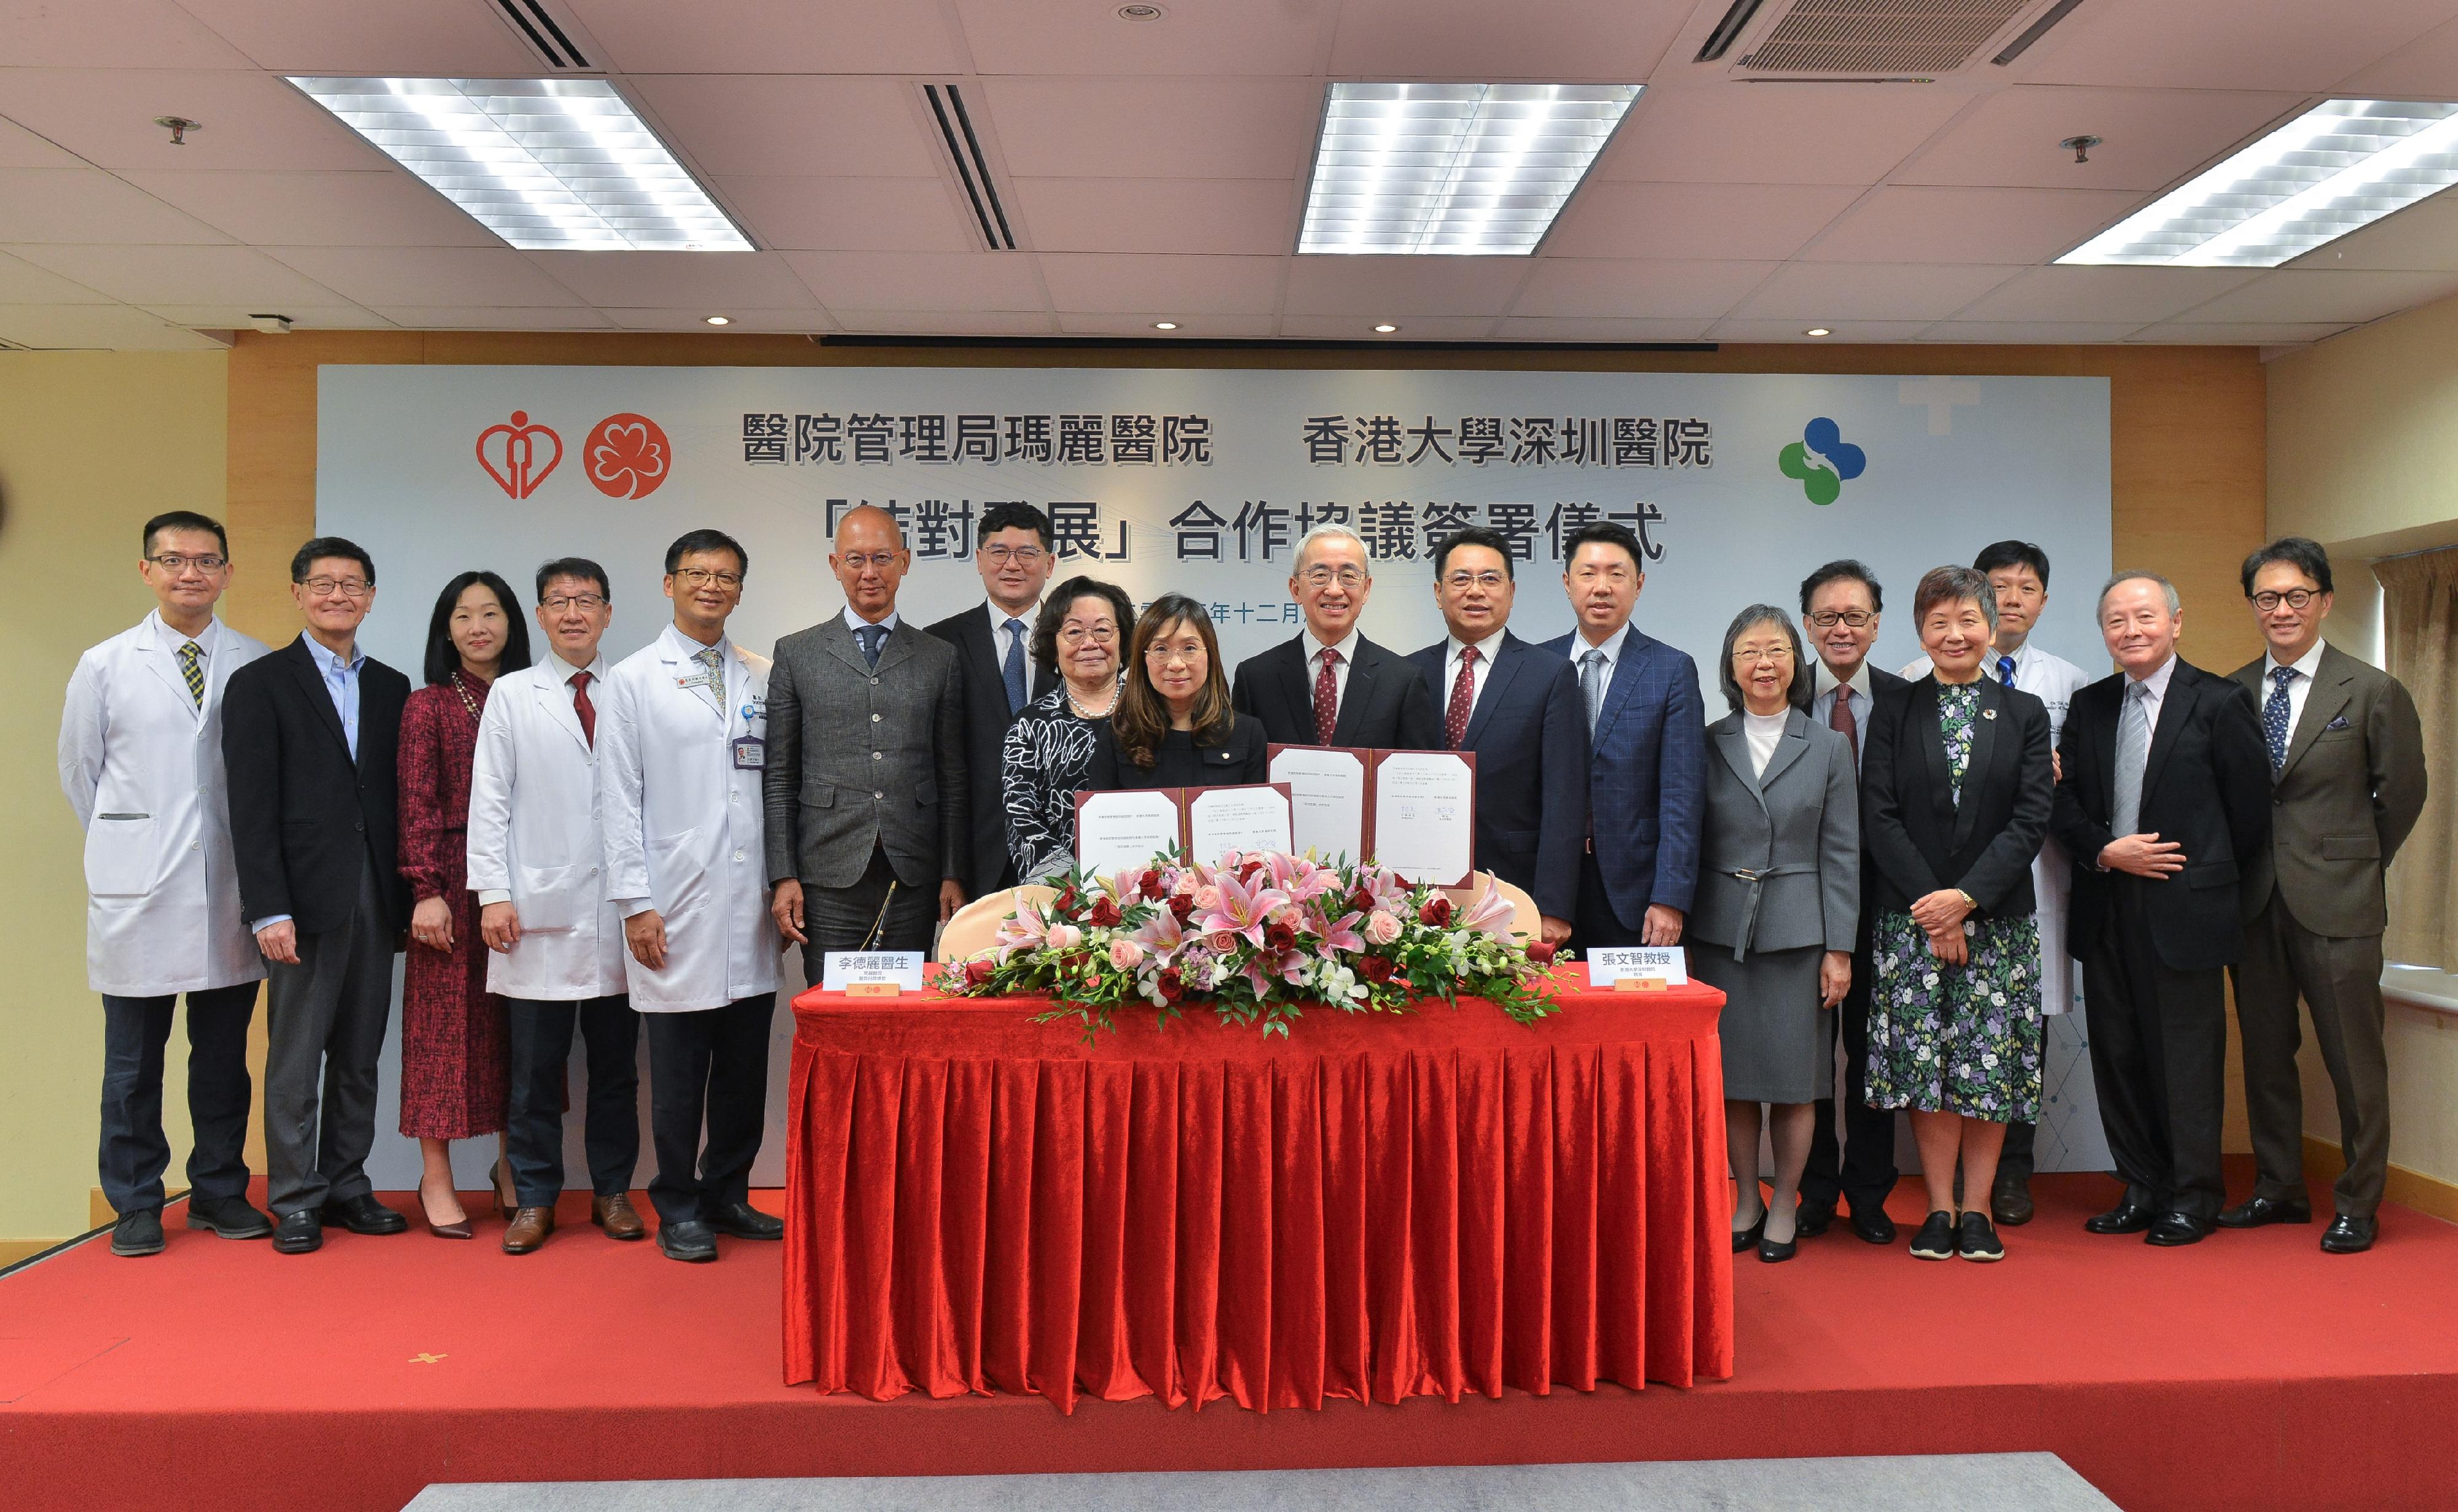 Representatives of the Hospital Authority, the University of Hong Kong-Shenzhen Hospital and the Li Ka Shing Faculty of Medicine of the University of Hong Kong witnessed the ceremony of signing a collaborative agreement today (December 8). Photo shows the Chairman of the Hospital Governing Committee, Queen Mary Hospital, Mr Philip Tsai (sixth left); the Chief Executive of the Hospital Authority, Dr Tony Ko (seventh left;) the Hospital Chief Executive of Queen Mary Hospital, Dr Theresa Li (ninth left); the Hospital Chief Executive of the University of Hong Kong-Shenzhen Hospital, Professor Kenneth Cheung (10th left); the Party Committee Secretary of the University of Hong Kong-Shenzhen Hospital, Mr Xu Xiaoping (eighth right), and other guests attending the ceremony. 